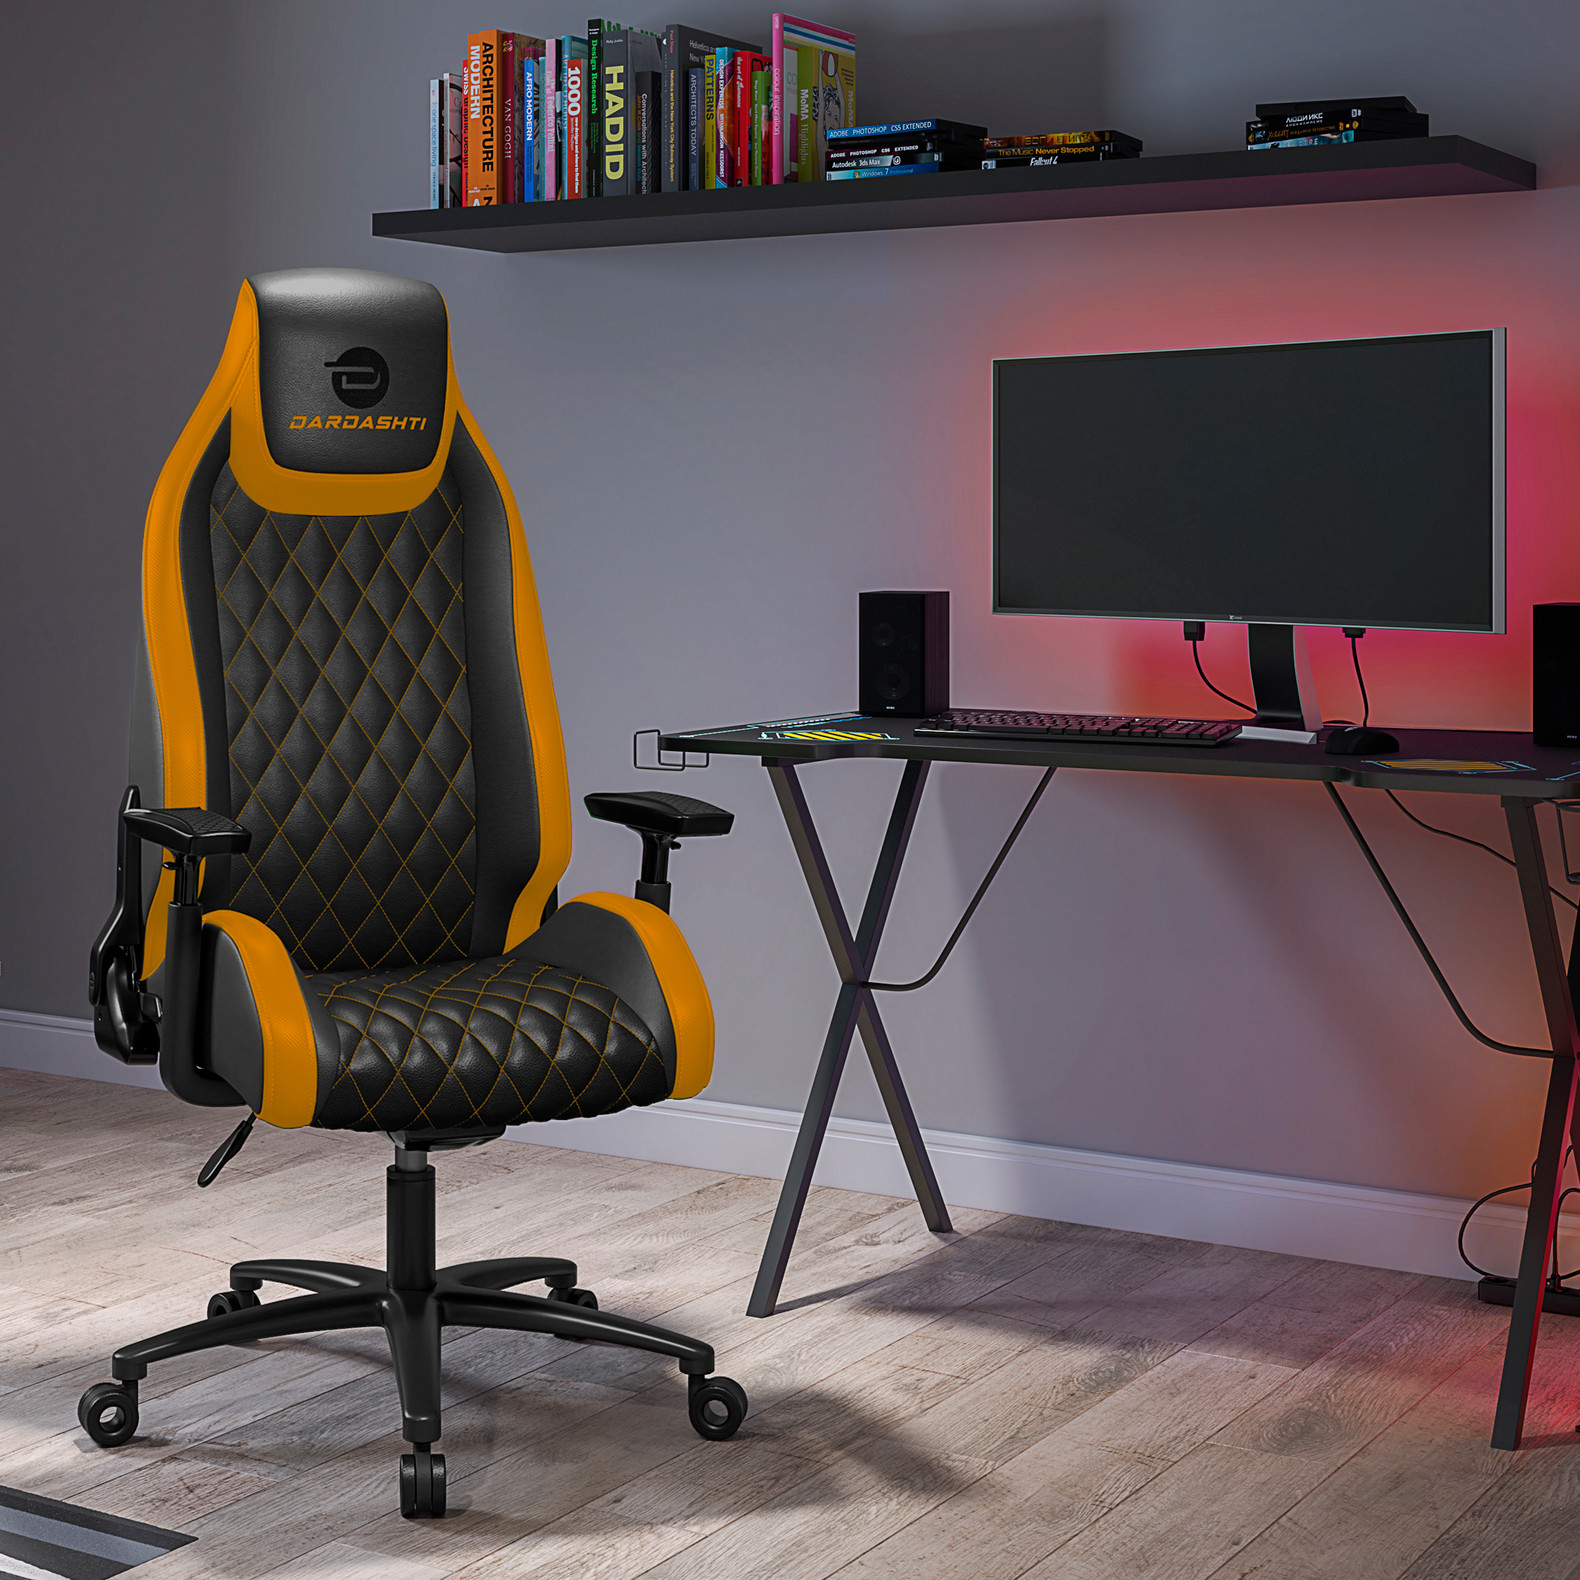 will these secret lab skins fit the 2020 version of chairs? I have a kitten  and could really use one. : r/secretlab